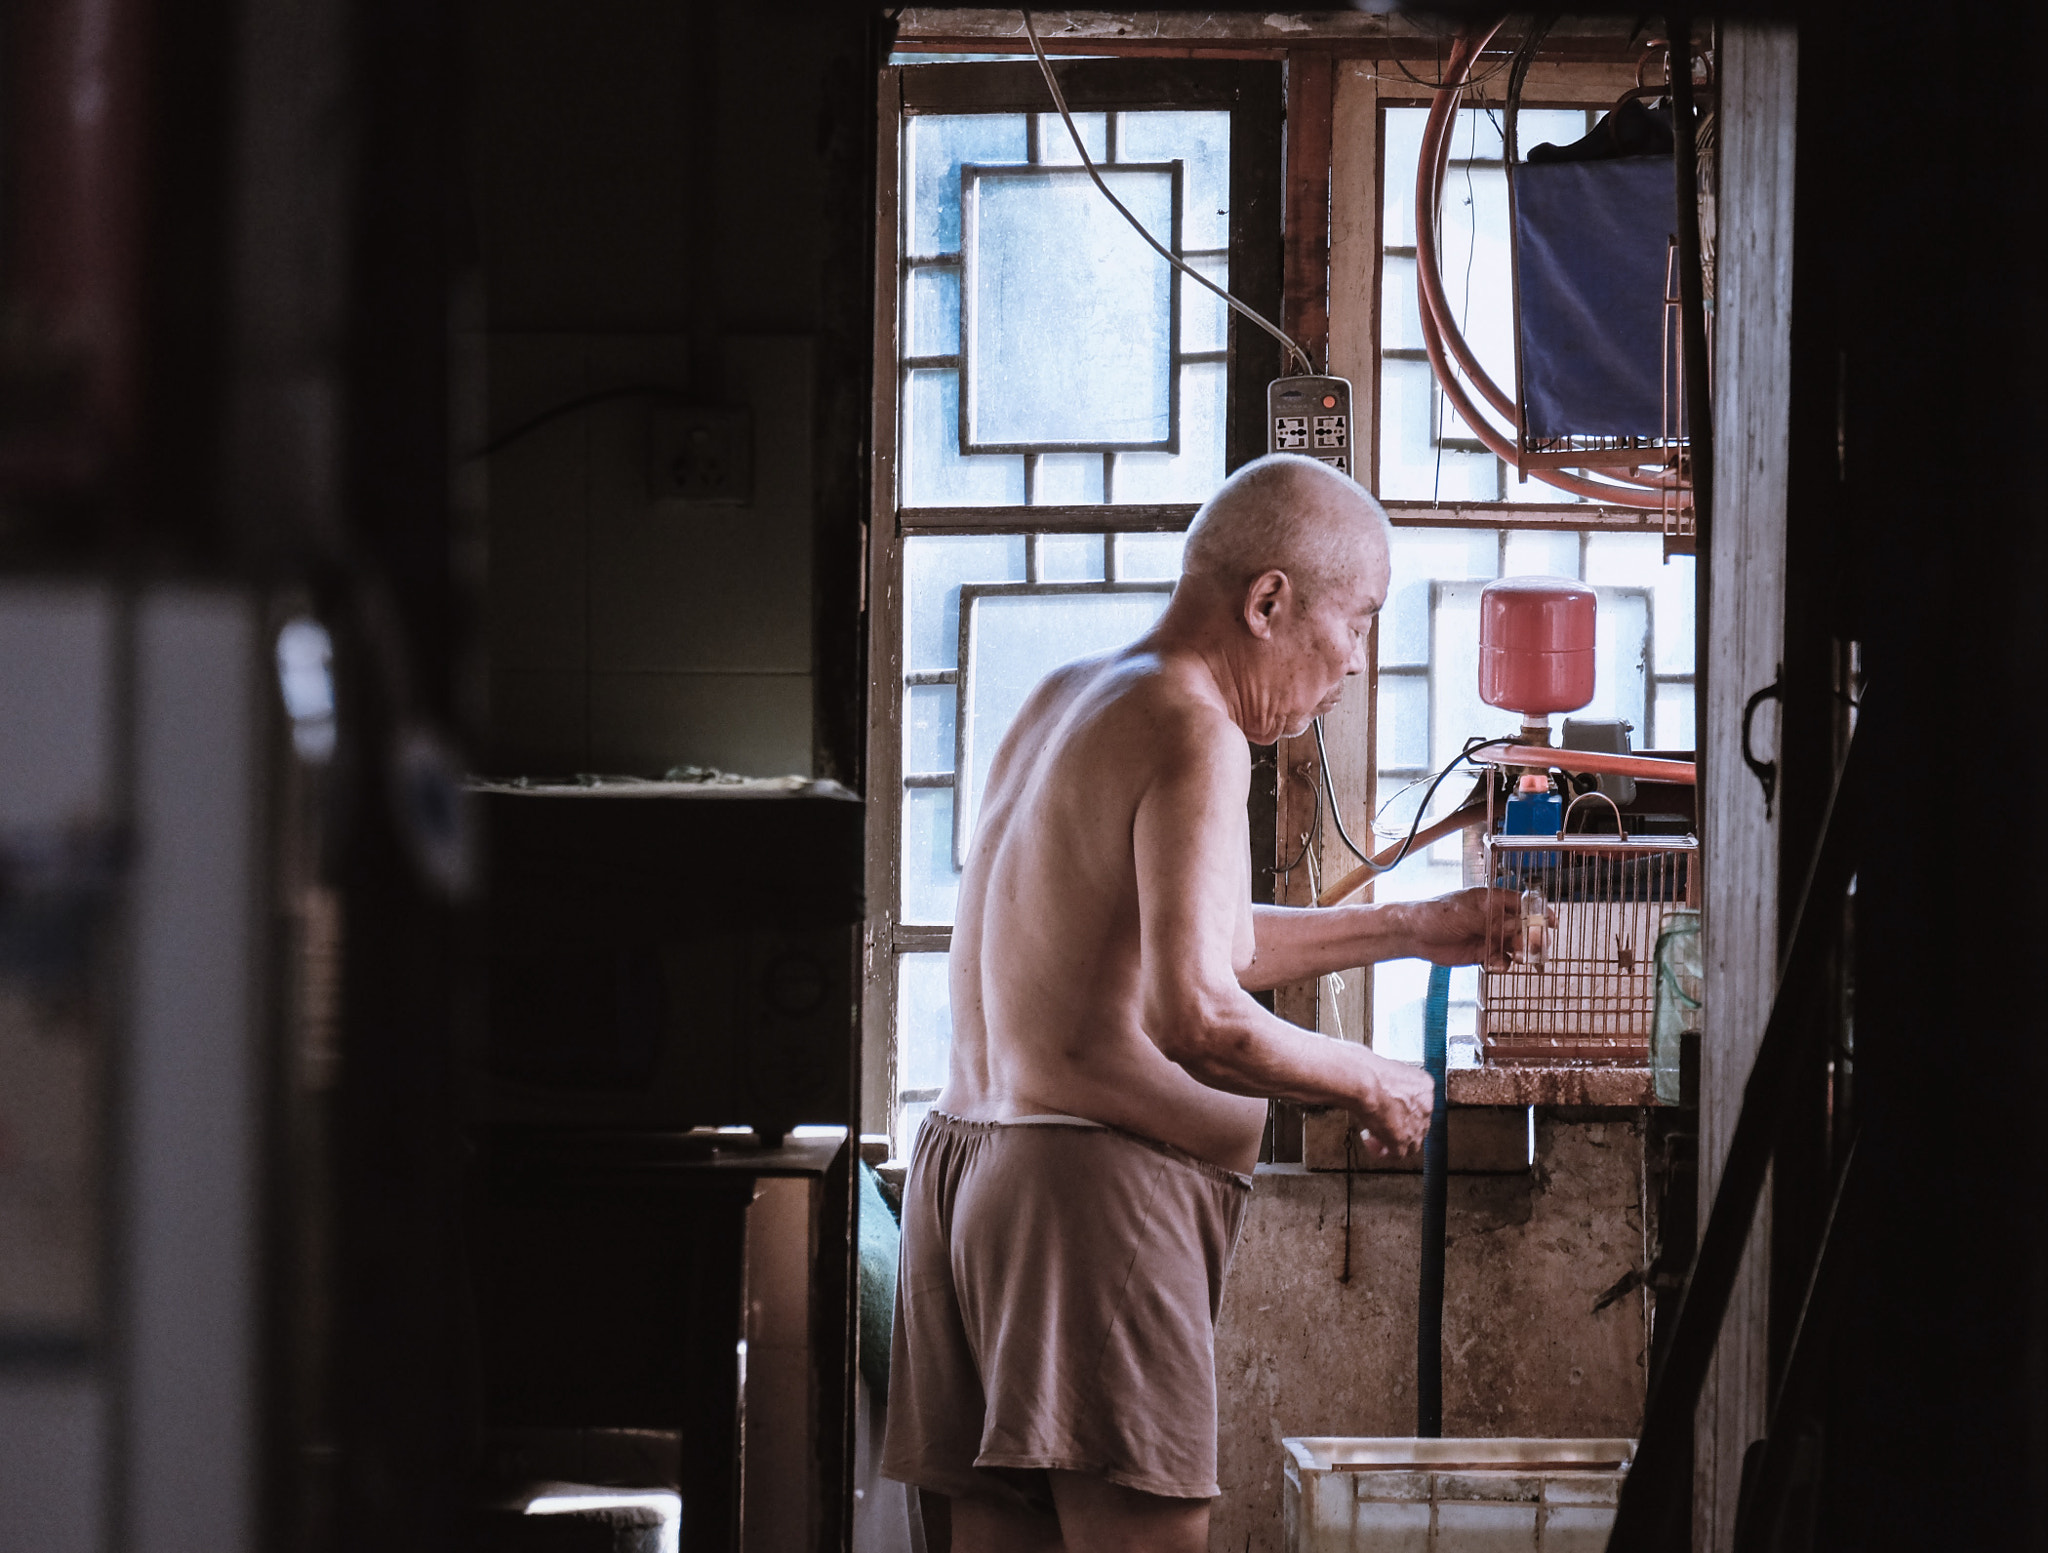 Fujifilm X-T10 sample photo. A retired old man cleaning bird cage. picture taken in suzhou, china photography